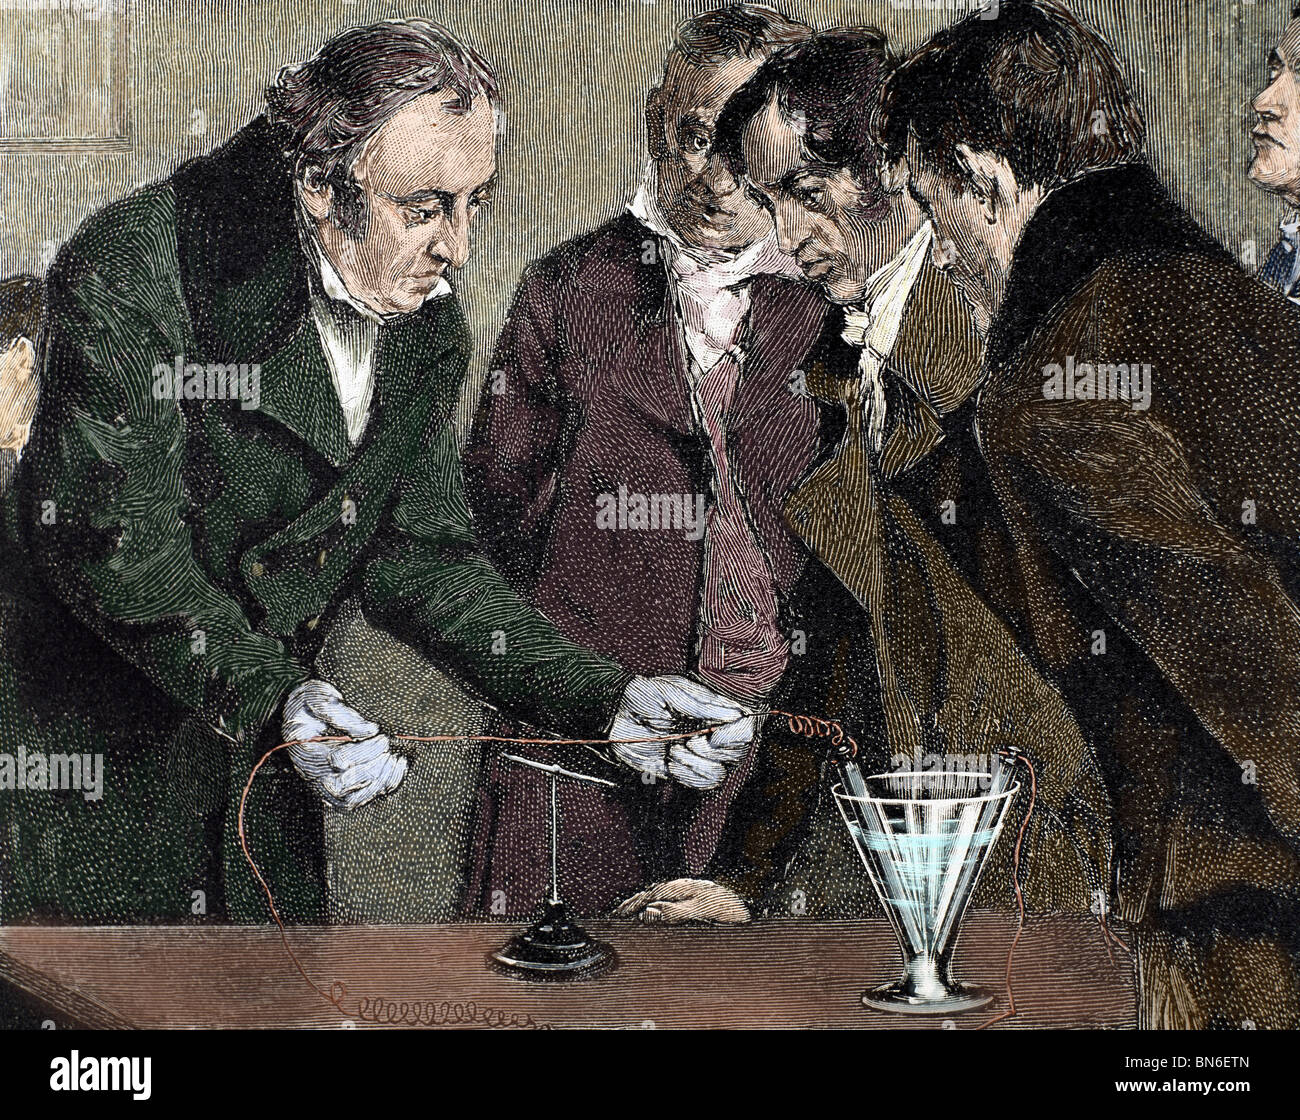 Oersted, Hans Christian (Copenhagen Rudkobing ,1777-1851). Danish physicist and chemist. Oersted discovers electromagnetism. Stock Photo